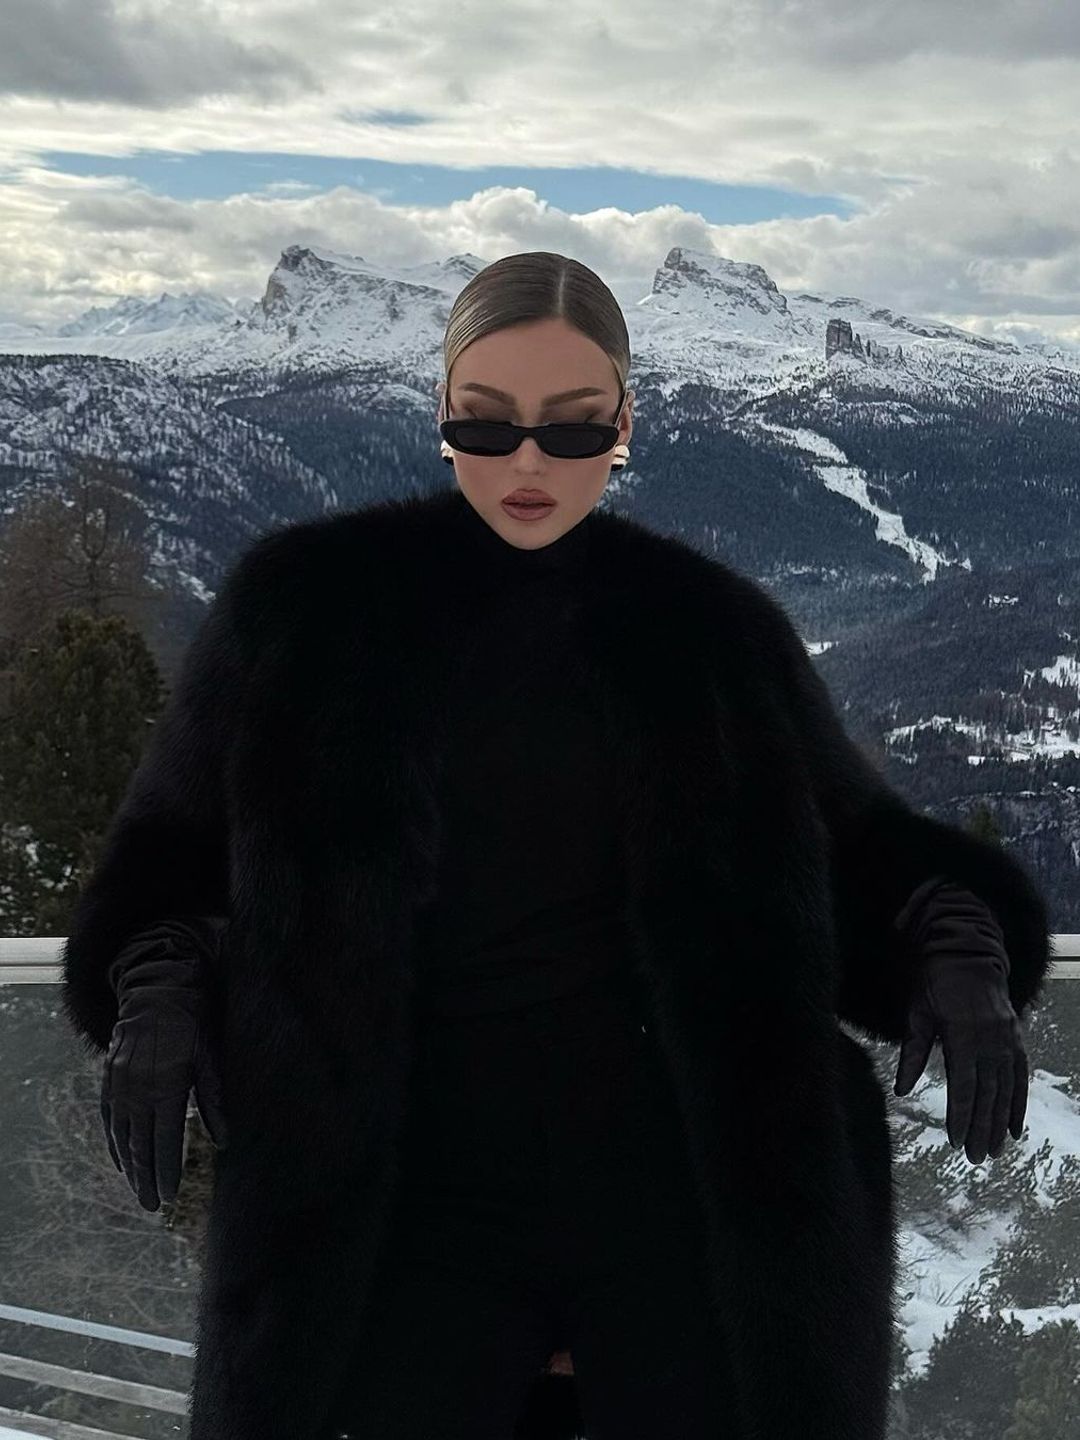 Influencer @romaneinnc wears a black fur coat, leather black gloves and oval sunglasses on holiday in the mountains